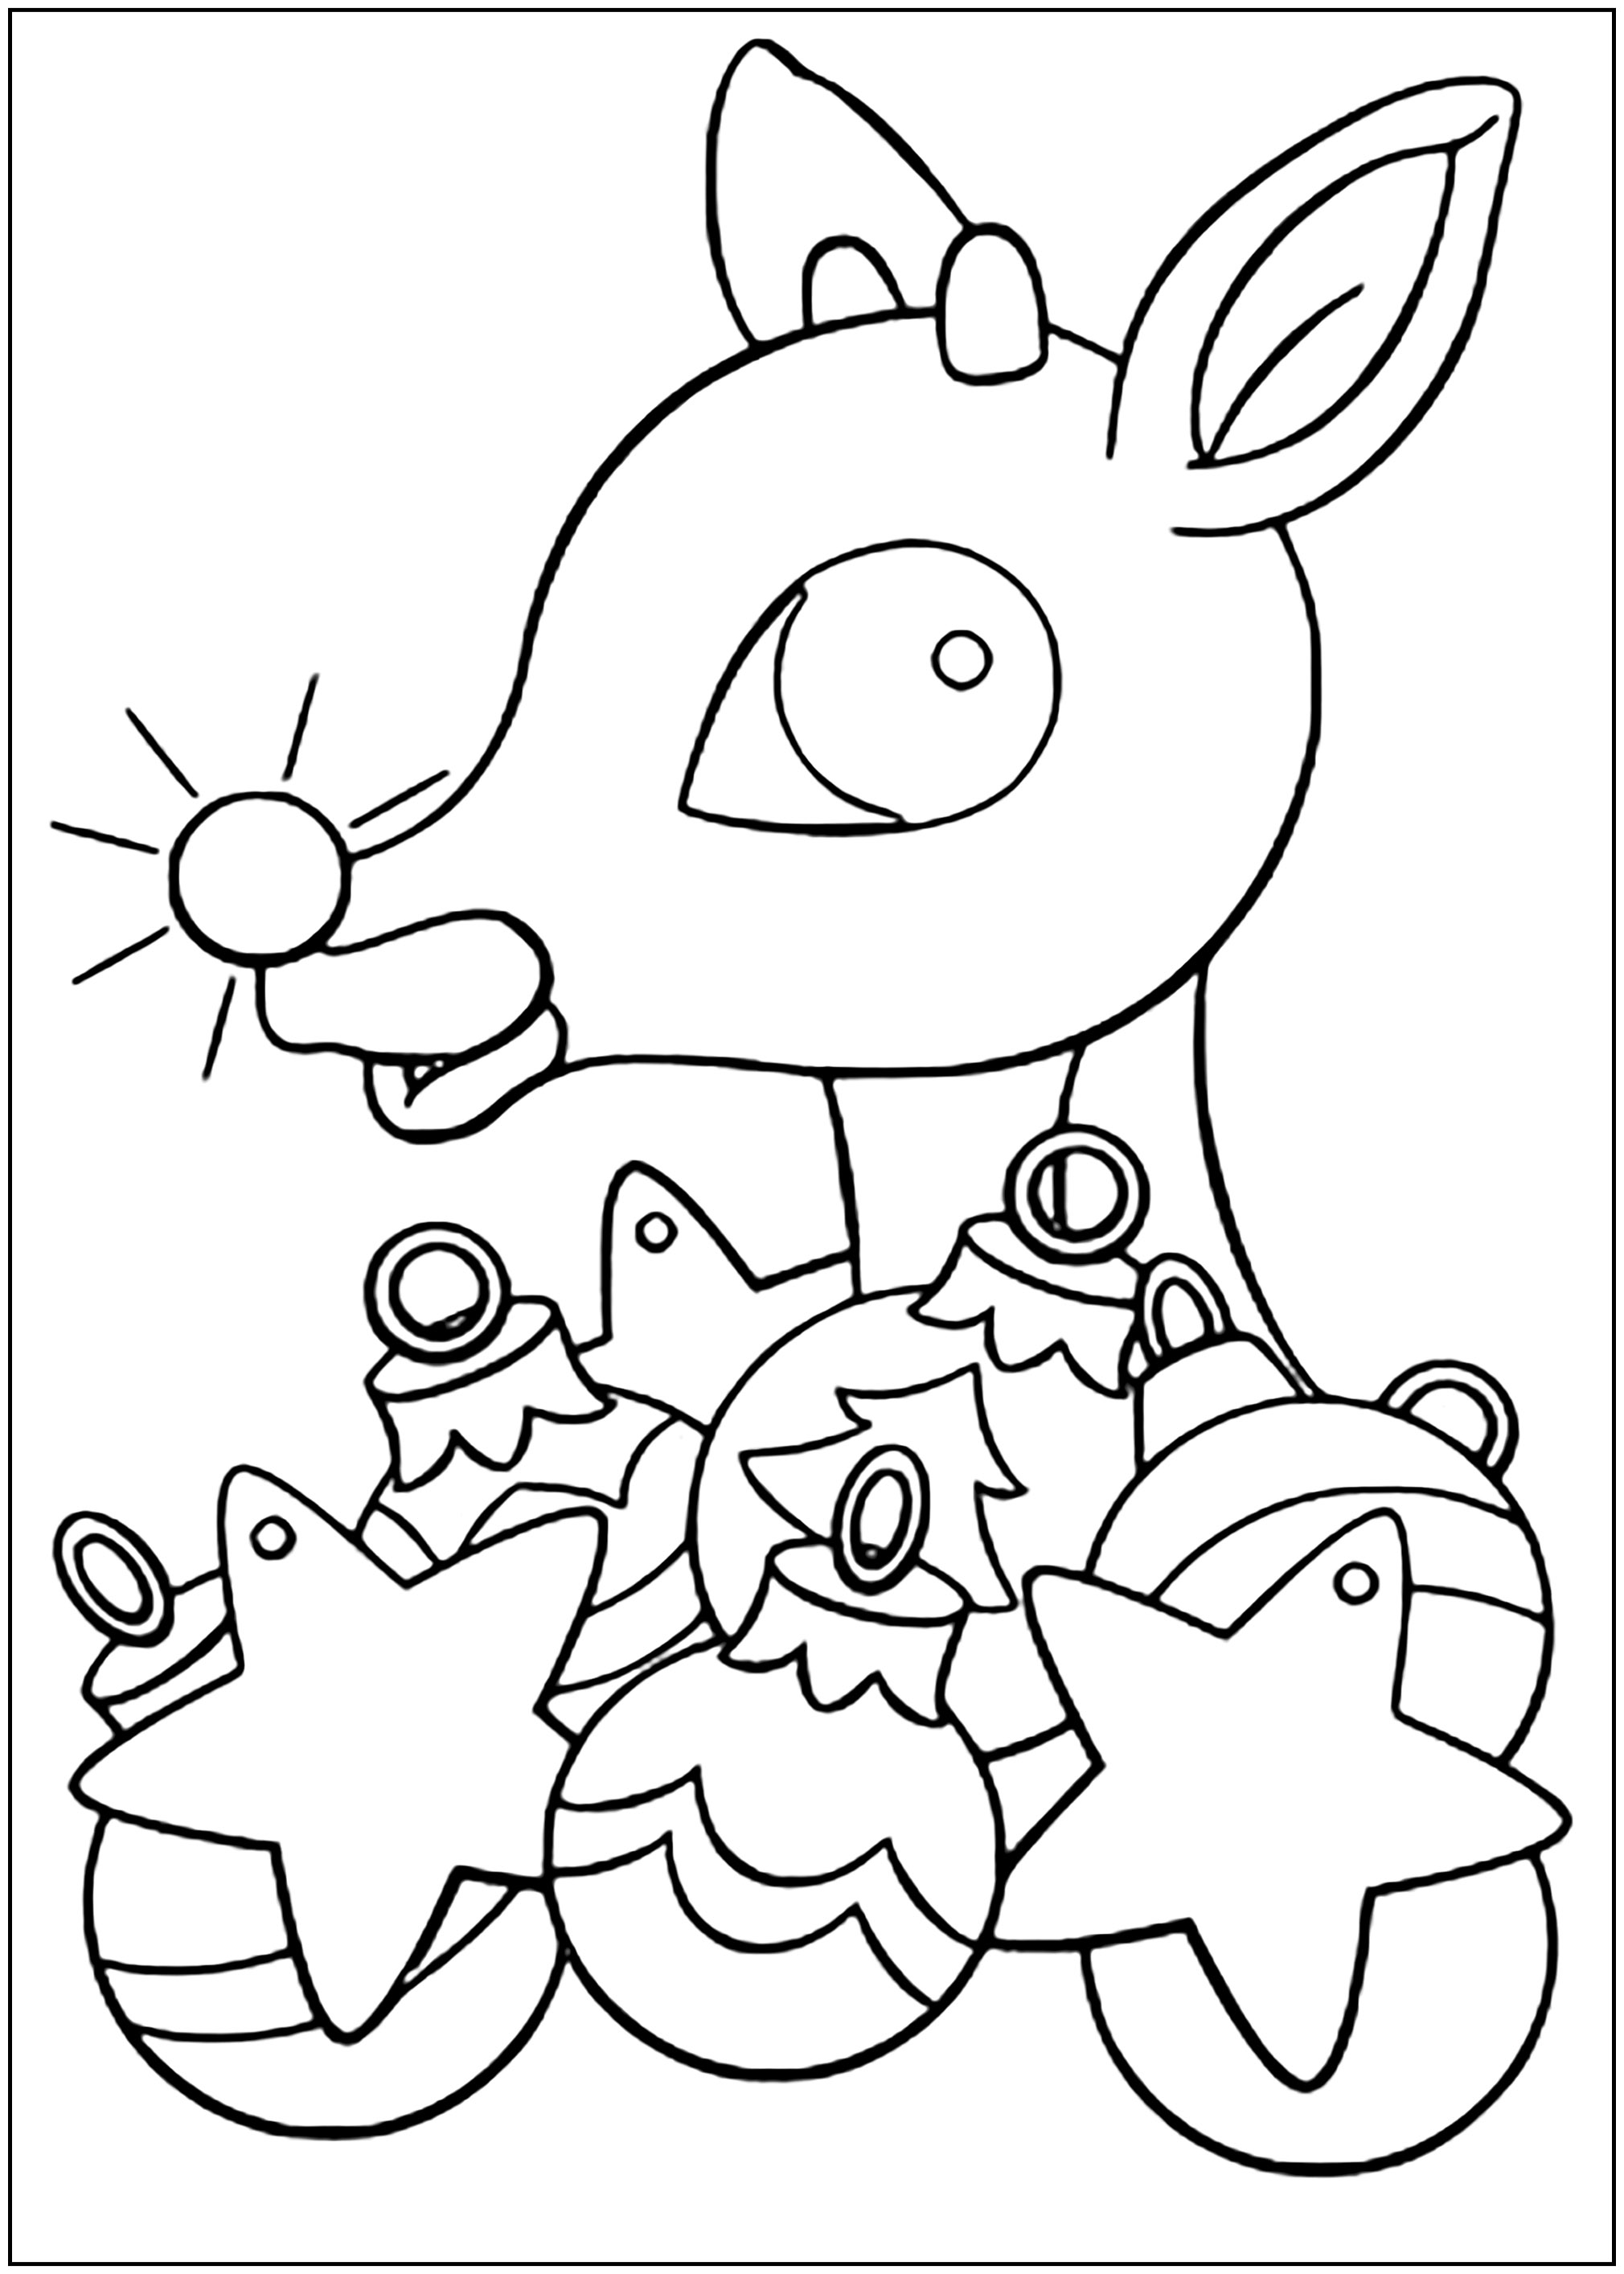 Coloring of Rudolph the Santa Claus Reindeer and Christmas ornaments